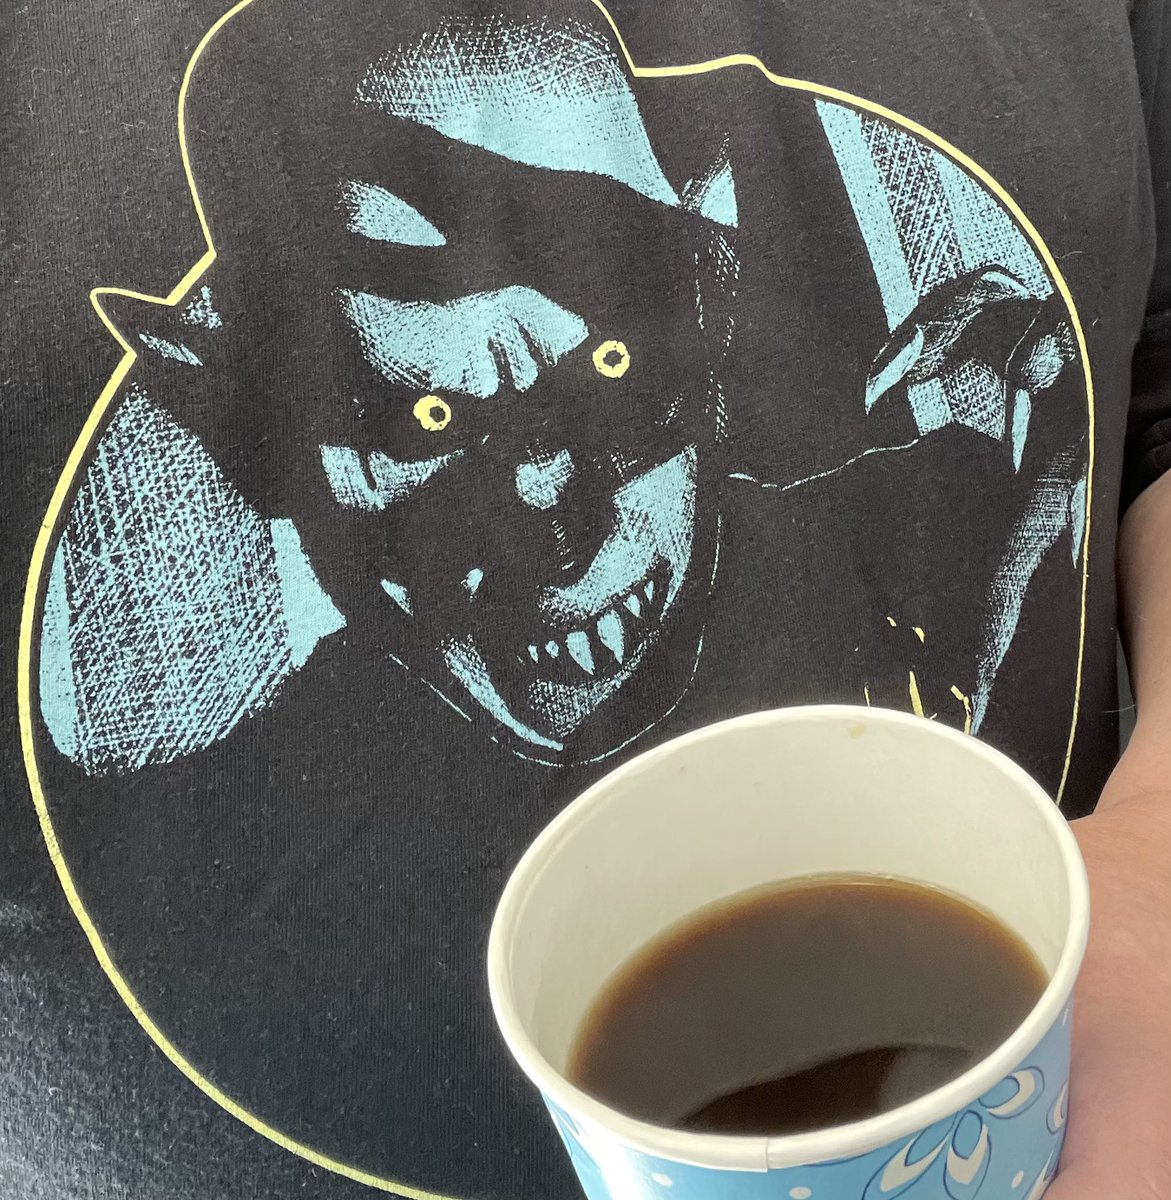 SALEM’S LATTE - throwing on my favorite Salem’s Lot T-shirt and making that Coffee to go as I drive south to Strongsville Oh for the CINEMA WASTELAND convention! Perfect place to be for any monster/sci-fi fan!